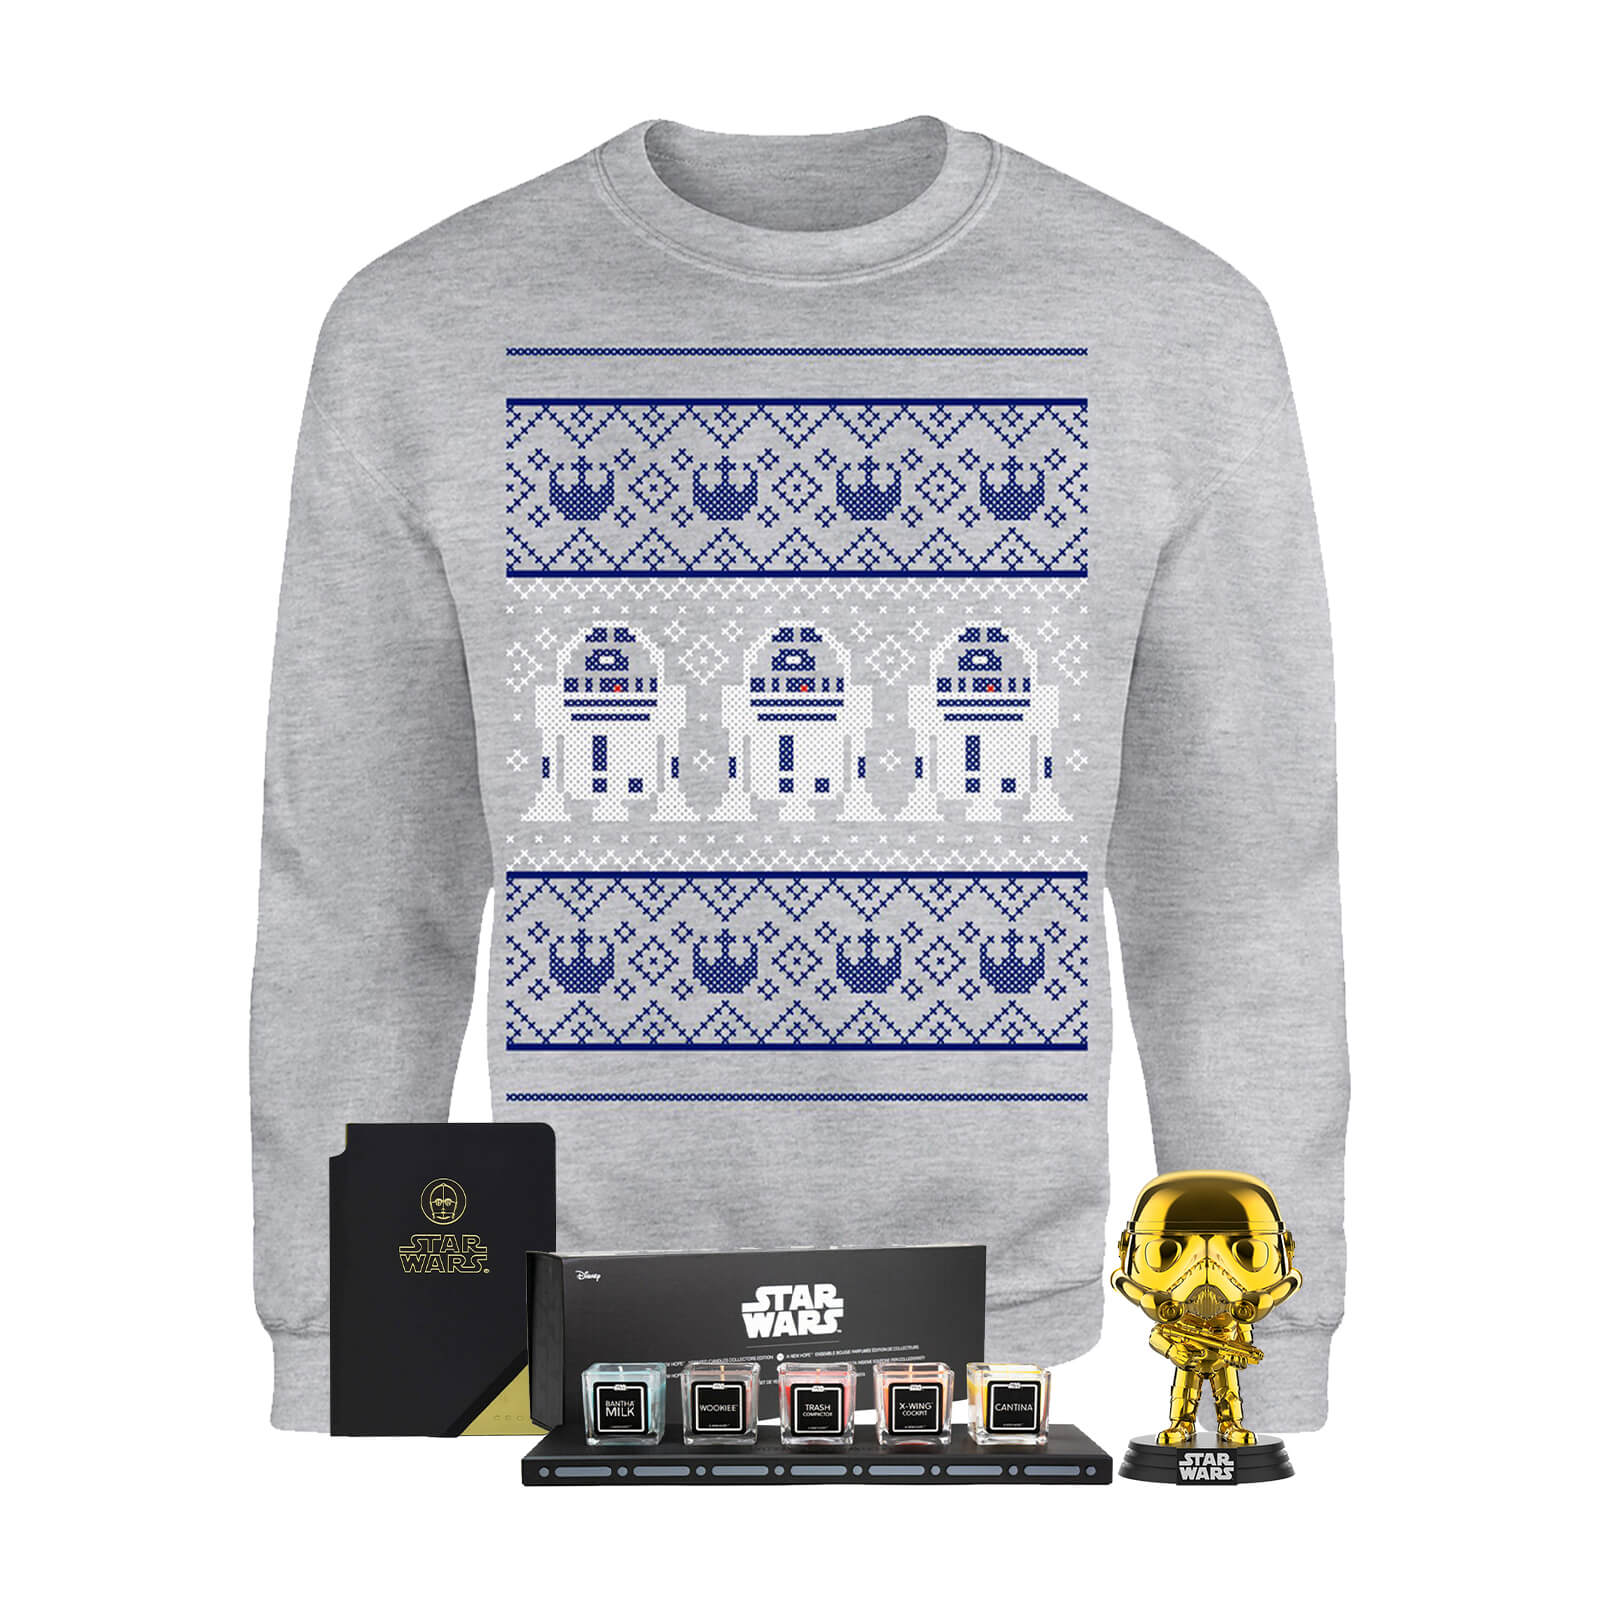 Image of Star Wars Officially Licensed MEGA Christmas Gift Set - Includes Christmas Sweatshirt plus 3 gifts - XL